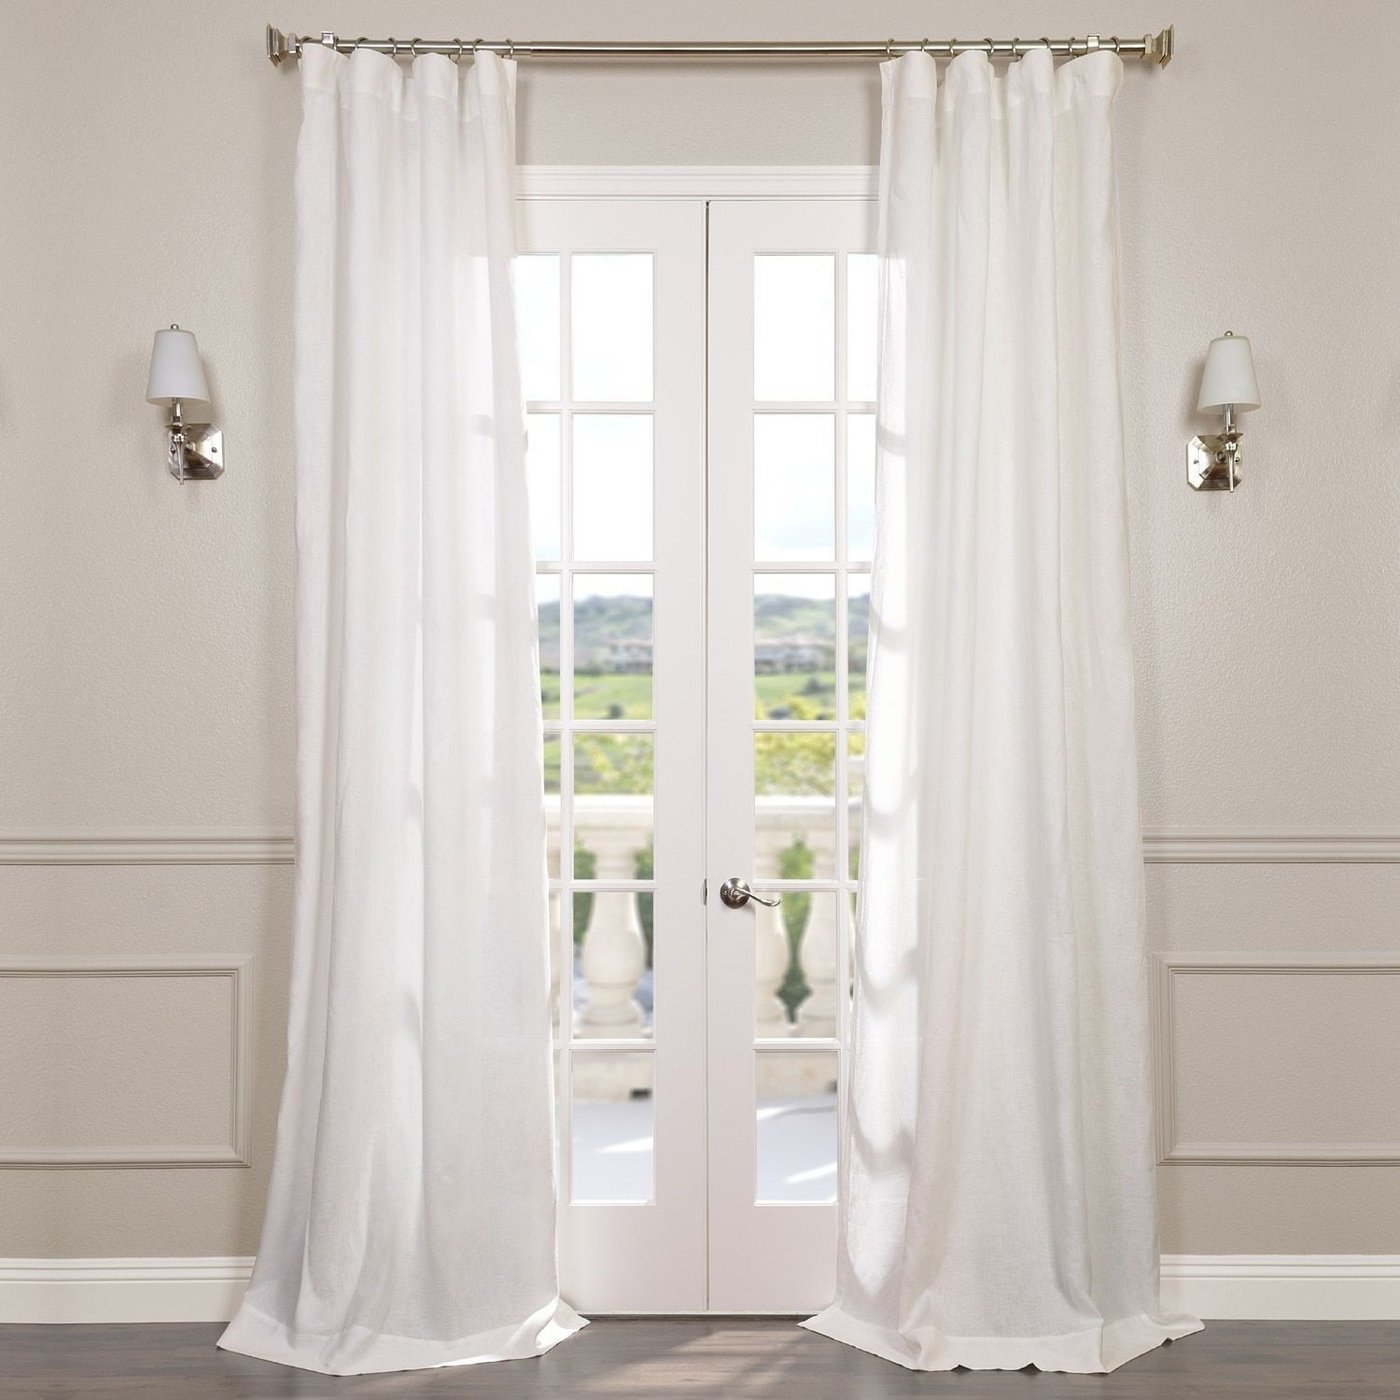 How to Choose Curtains & Drapes - Foter